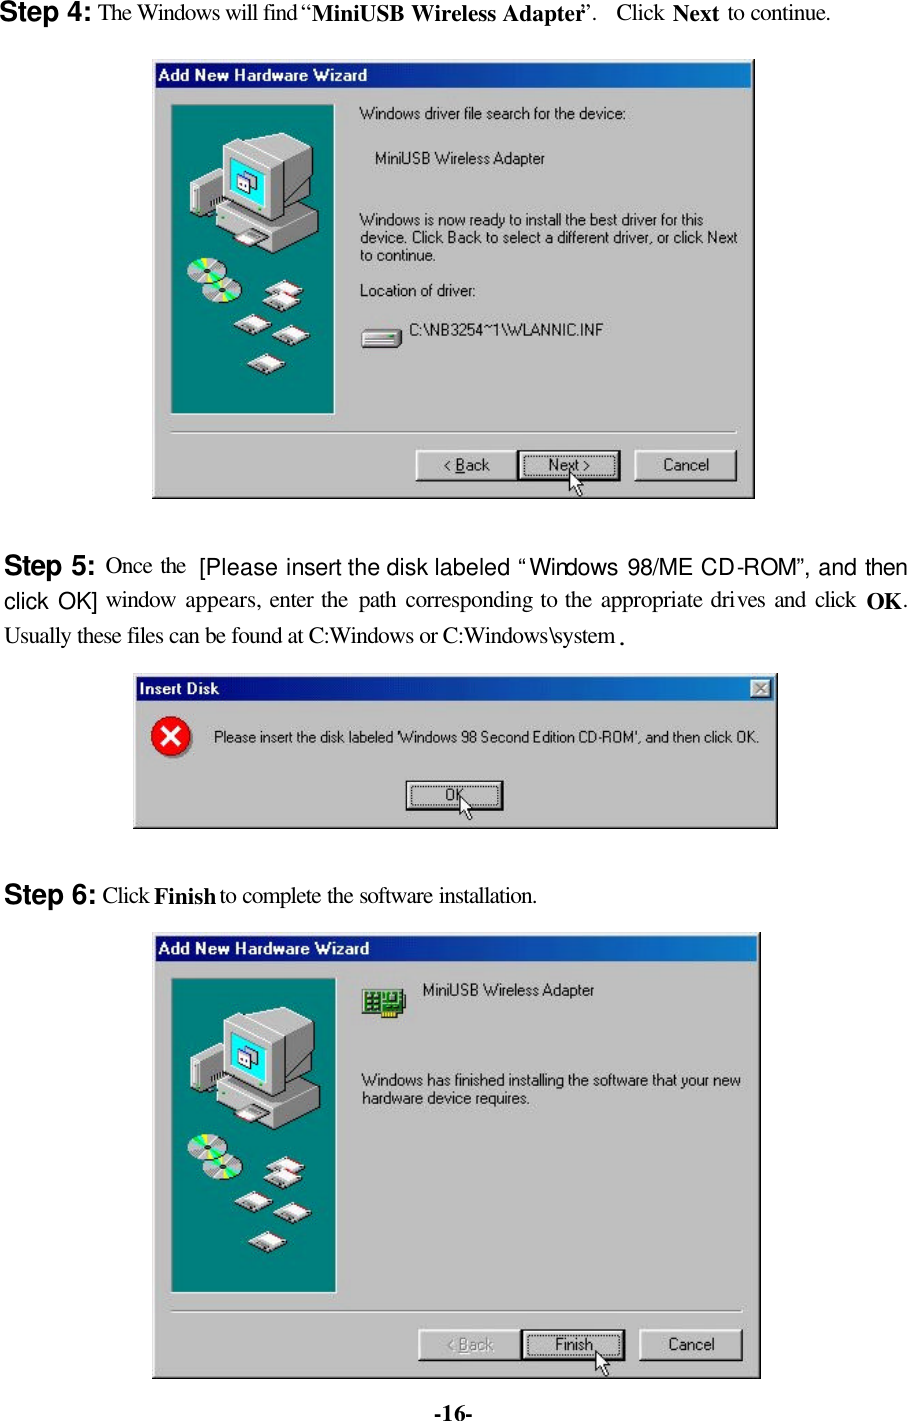   -16-Step 4: The Windows will find “MiniUSB Wireless Adapter”.  Click Next to continue.   Step 5: Once the [Please insert the disk labeled “Windows 98/ME CD-ROM”, and then click OK] window  appears, enter the path  corresponding to the appropriate drives and click OK. Usually these files can be found at C:Windows or C:Windows\system.  Step 6: Click Finish to complete the software installation.  